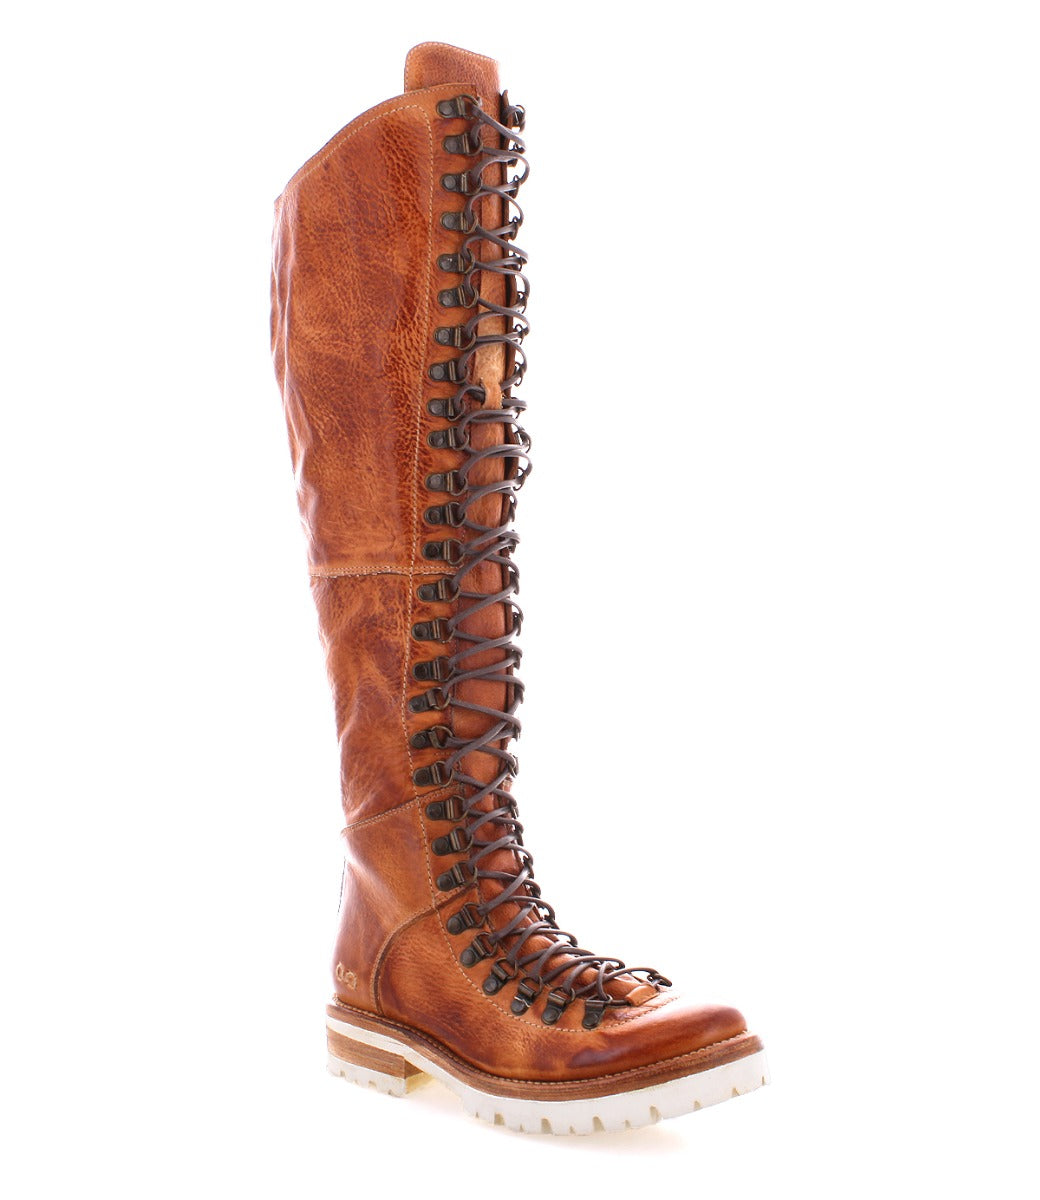 A women's Lustrous tan leather boot with laces from Bed Stu.